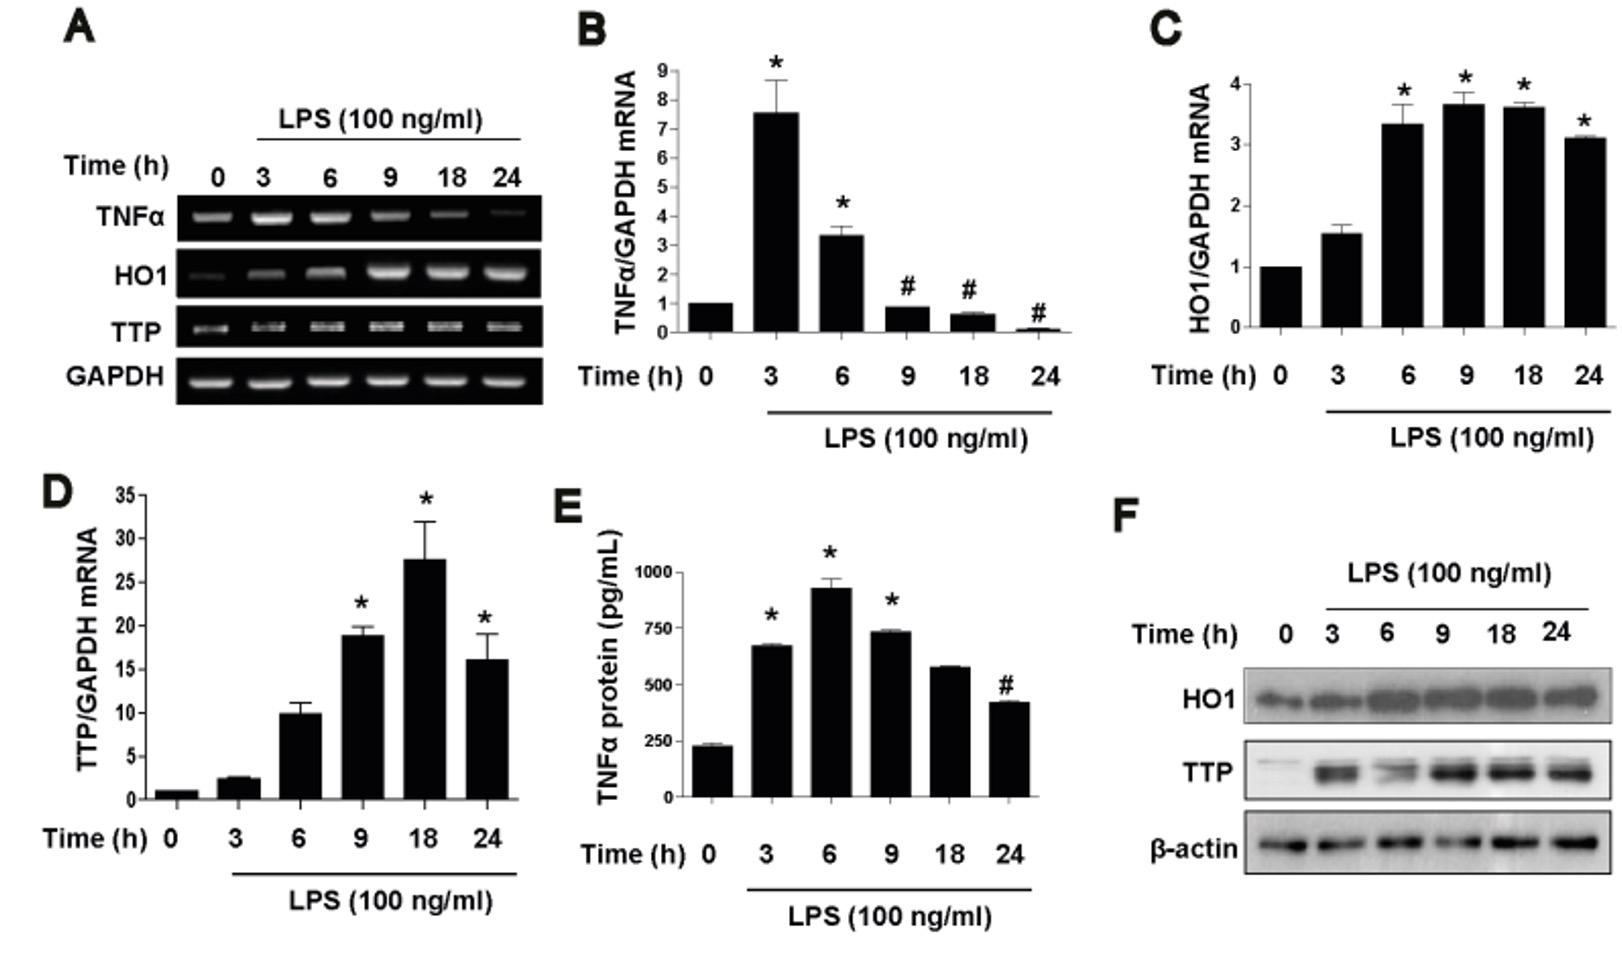 Lipopolysaccharide tolerance attenuates inflammatory responses by increasing heme oxygenase-1 and tristetraprolin expression in Raw264.7 macrophages